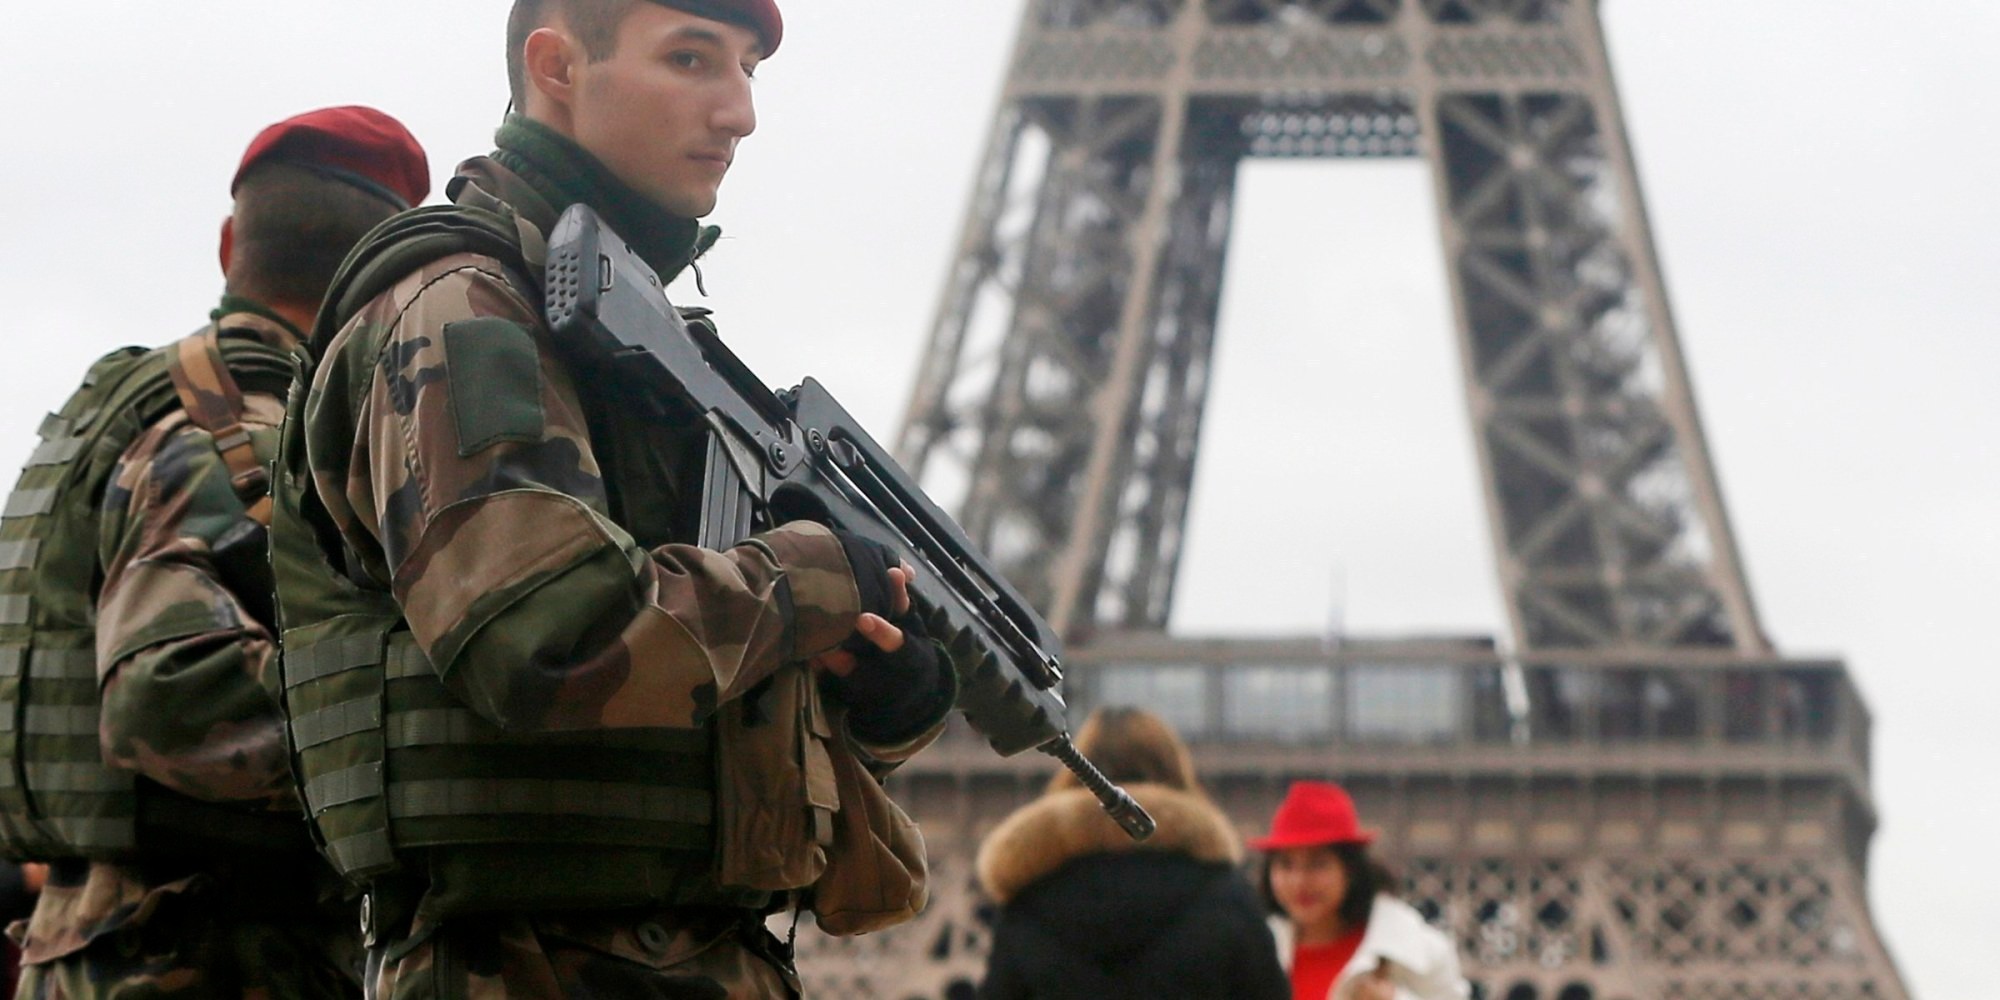 French soldier patrol near the Eiffel Tower in Paris as part of the highest level of "Vigipirate" security